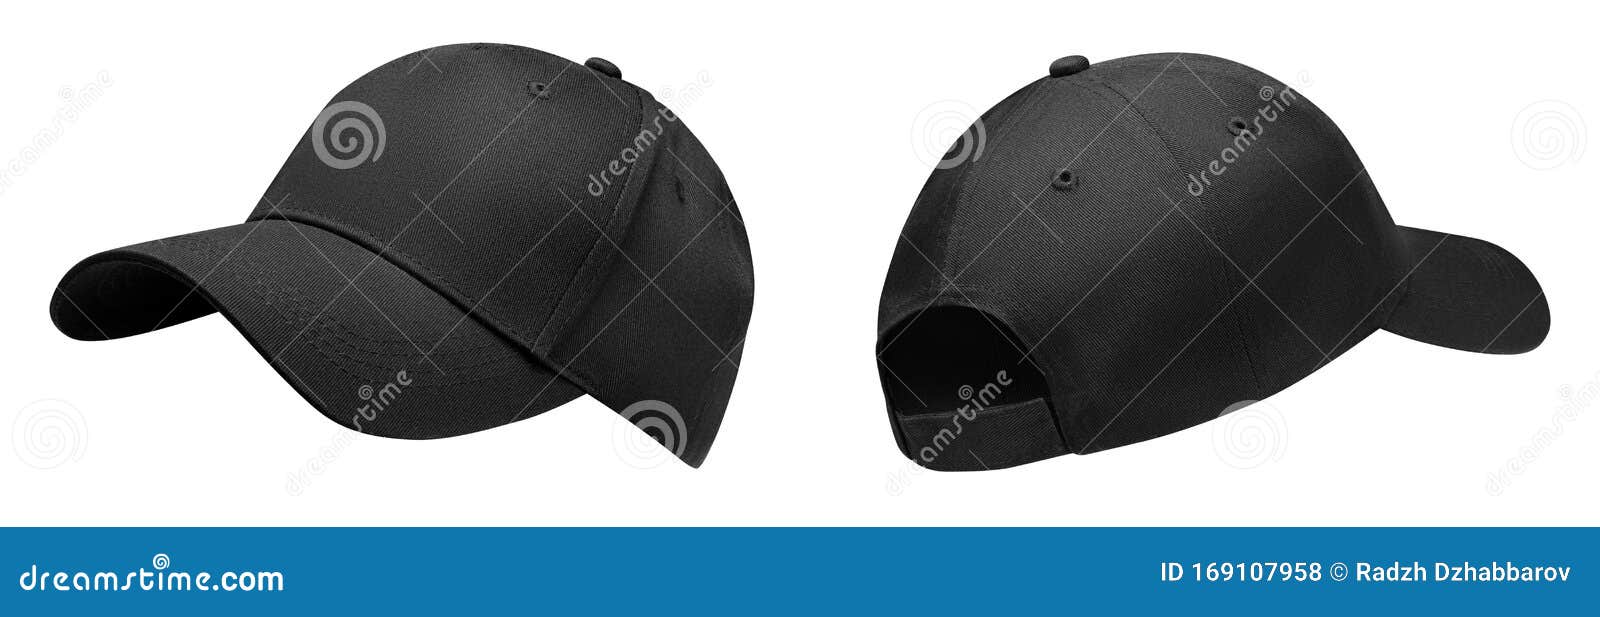 Download Black Baseball Cap In Angles View Front And Back. Mockup ...